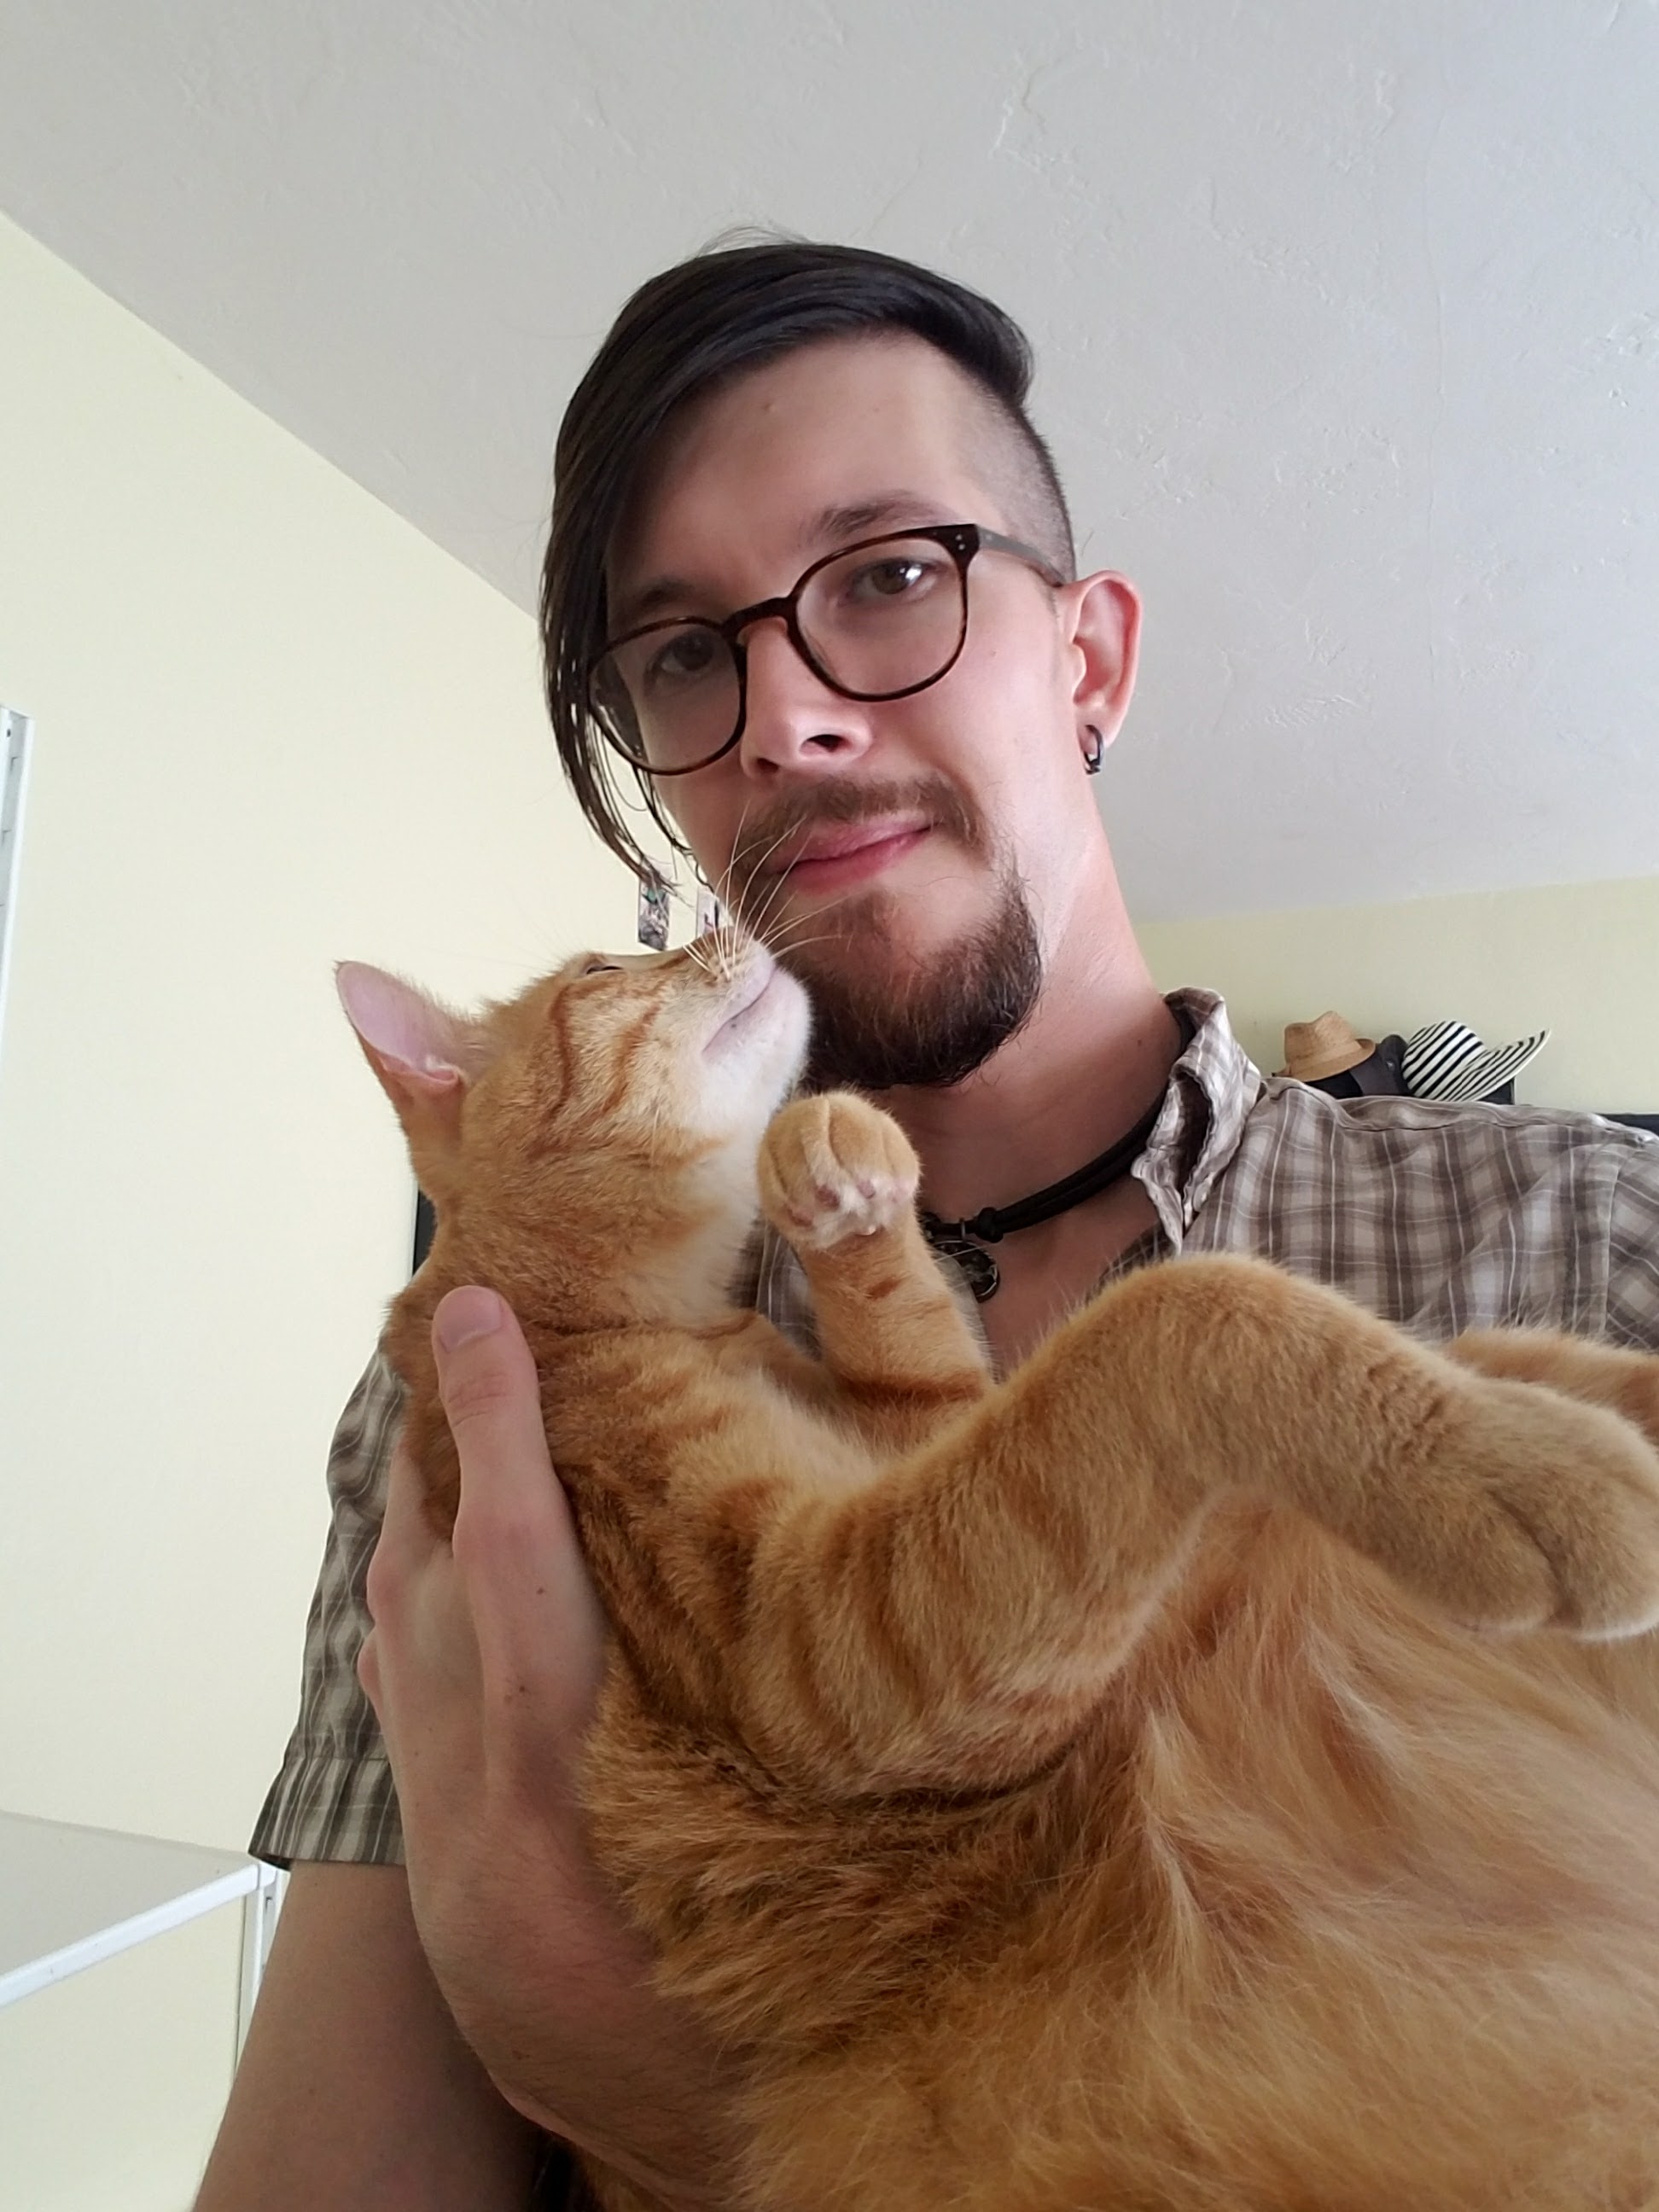 Image of Hilary, wearing round, brown glasses, his hair styled in an undercut and swept to the right of his face, holding an orange cat.